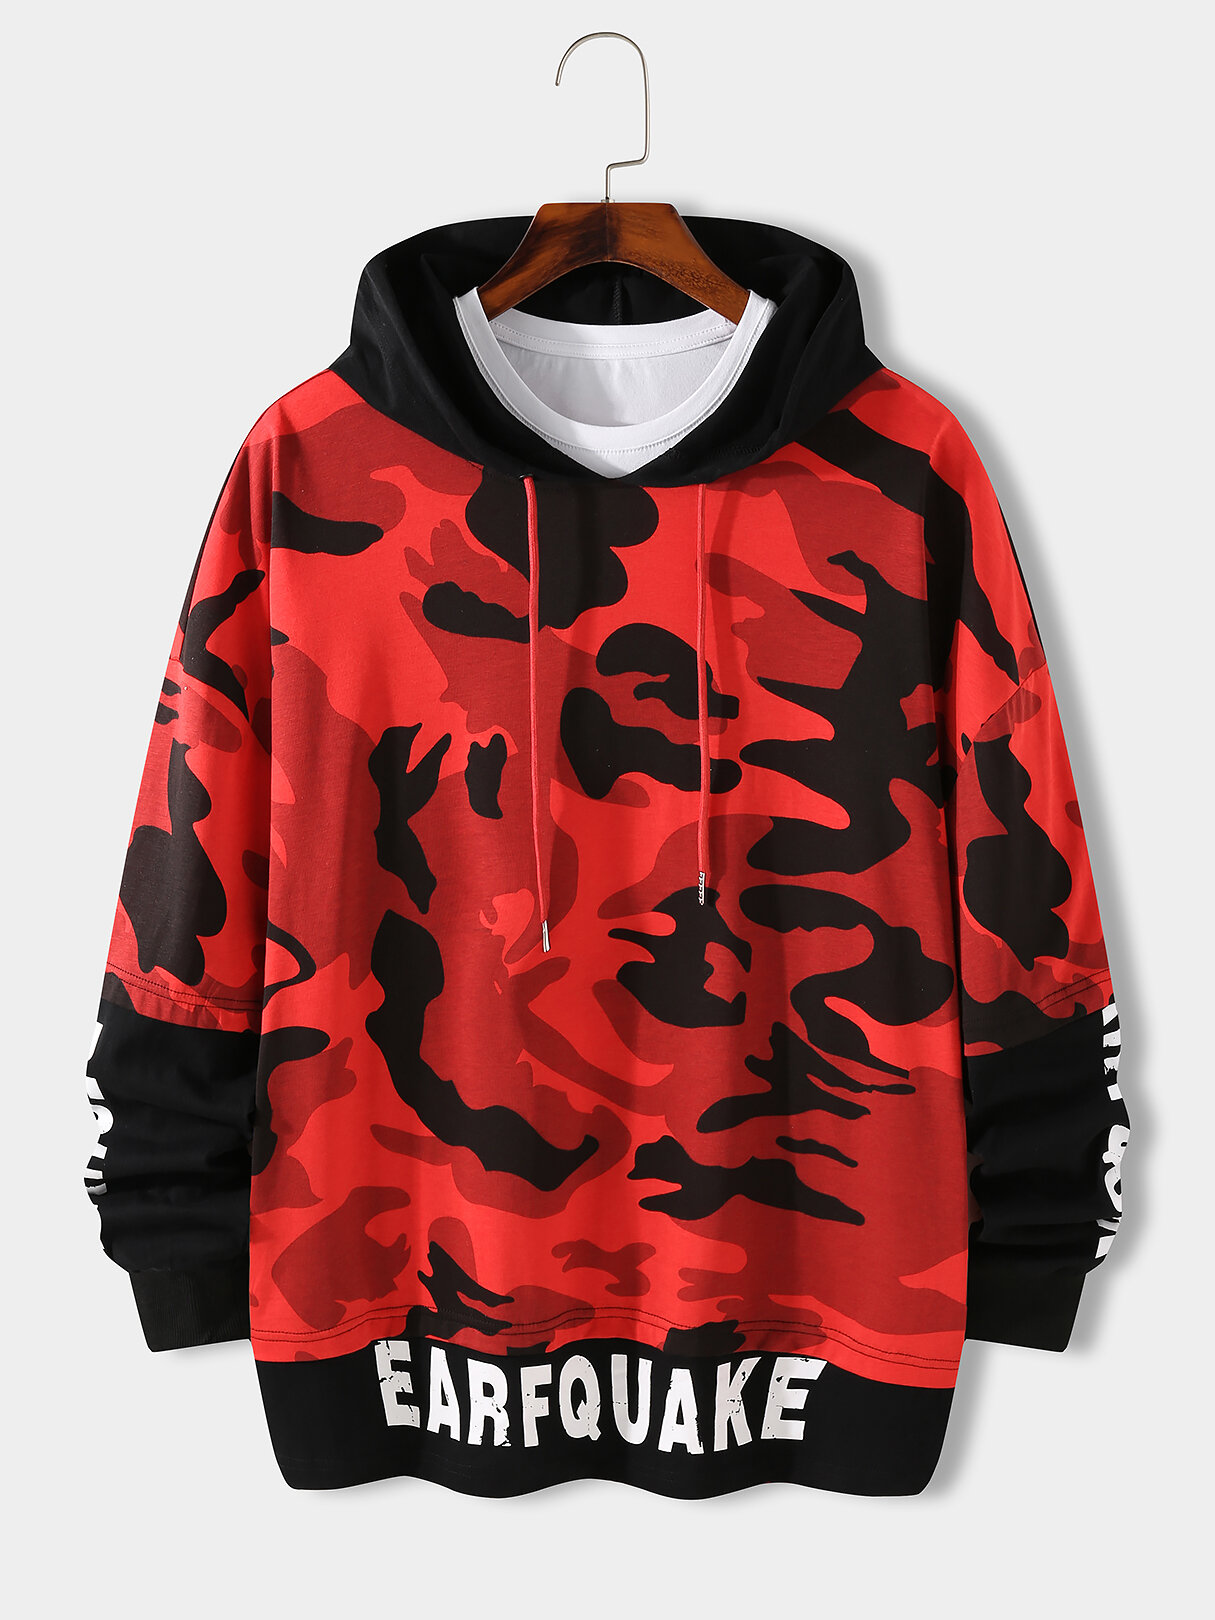 

Mens Camo Letter Print Stitching Street Loose Hoodies, Red